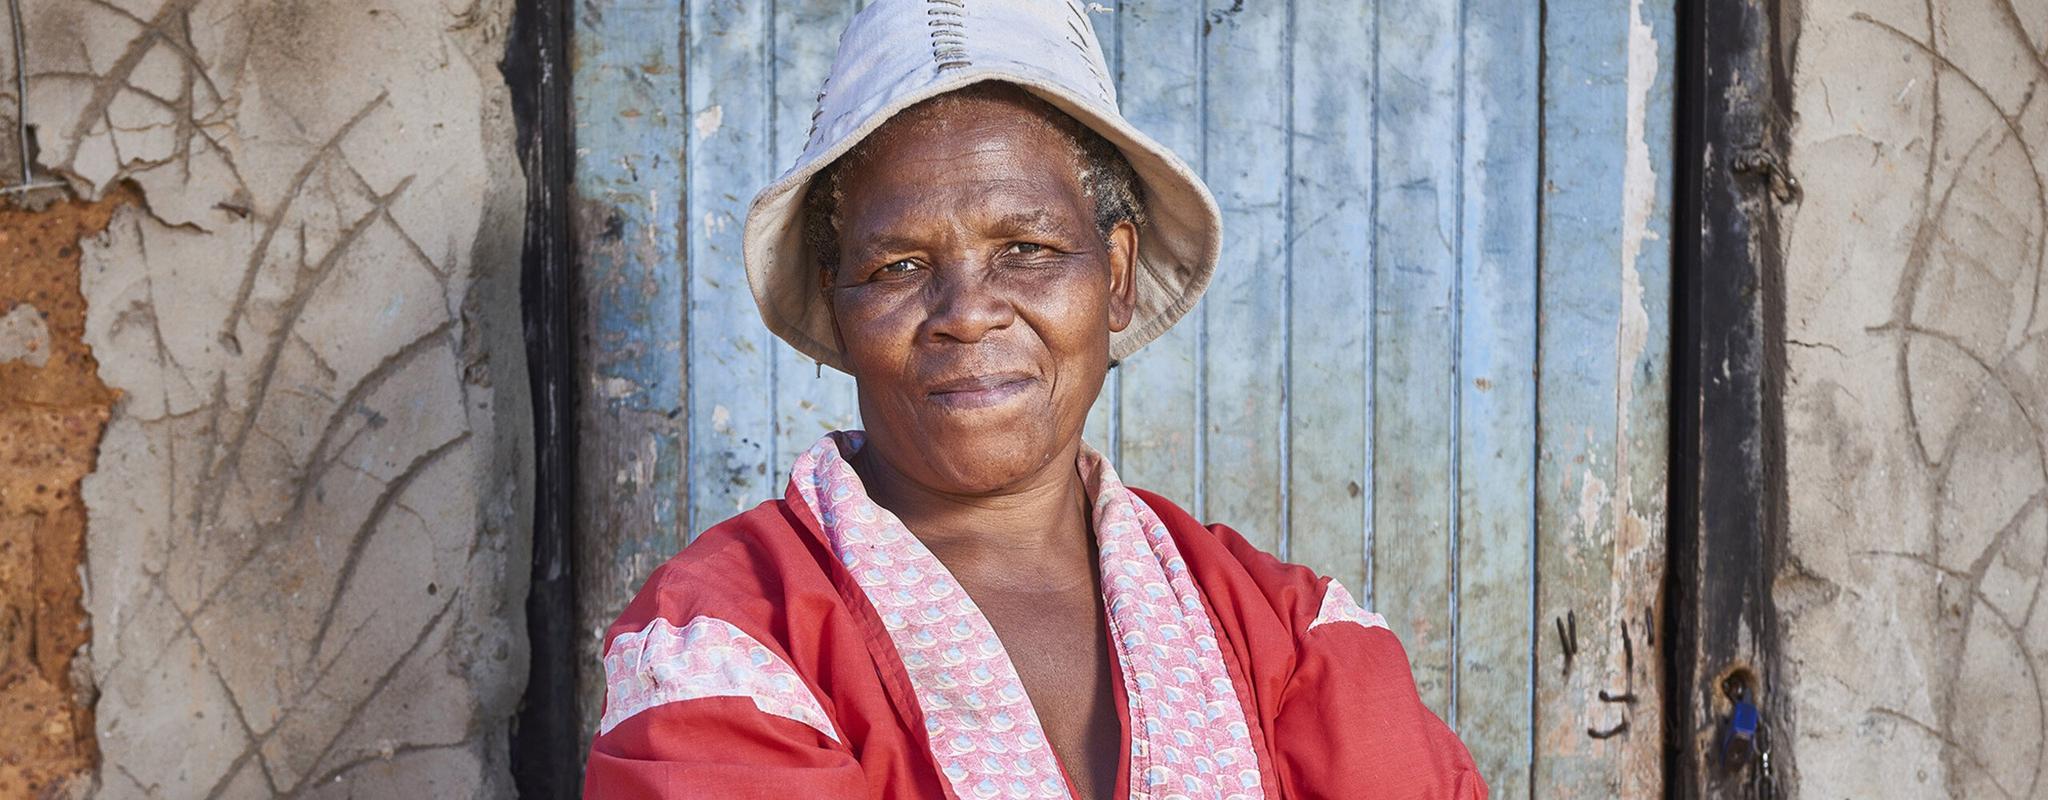 Makita Magwaza stands firmly, arms crossed, in front of a faded blue door. She wears a colourful red dress and smiles from beneath her white bucket hat.